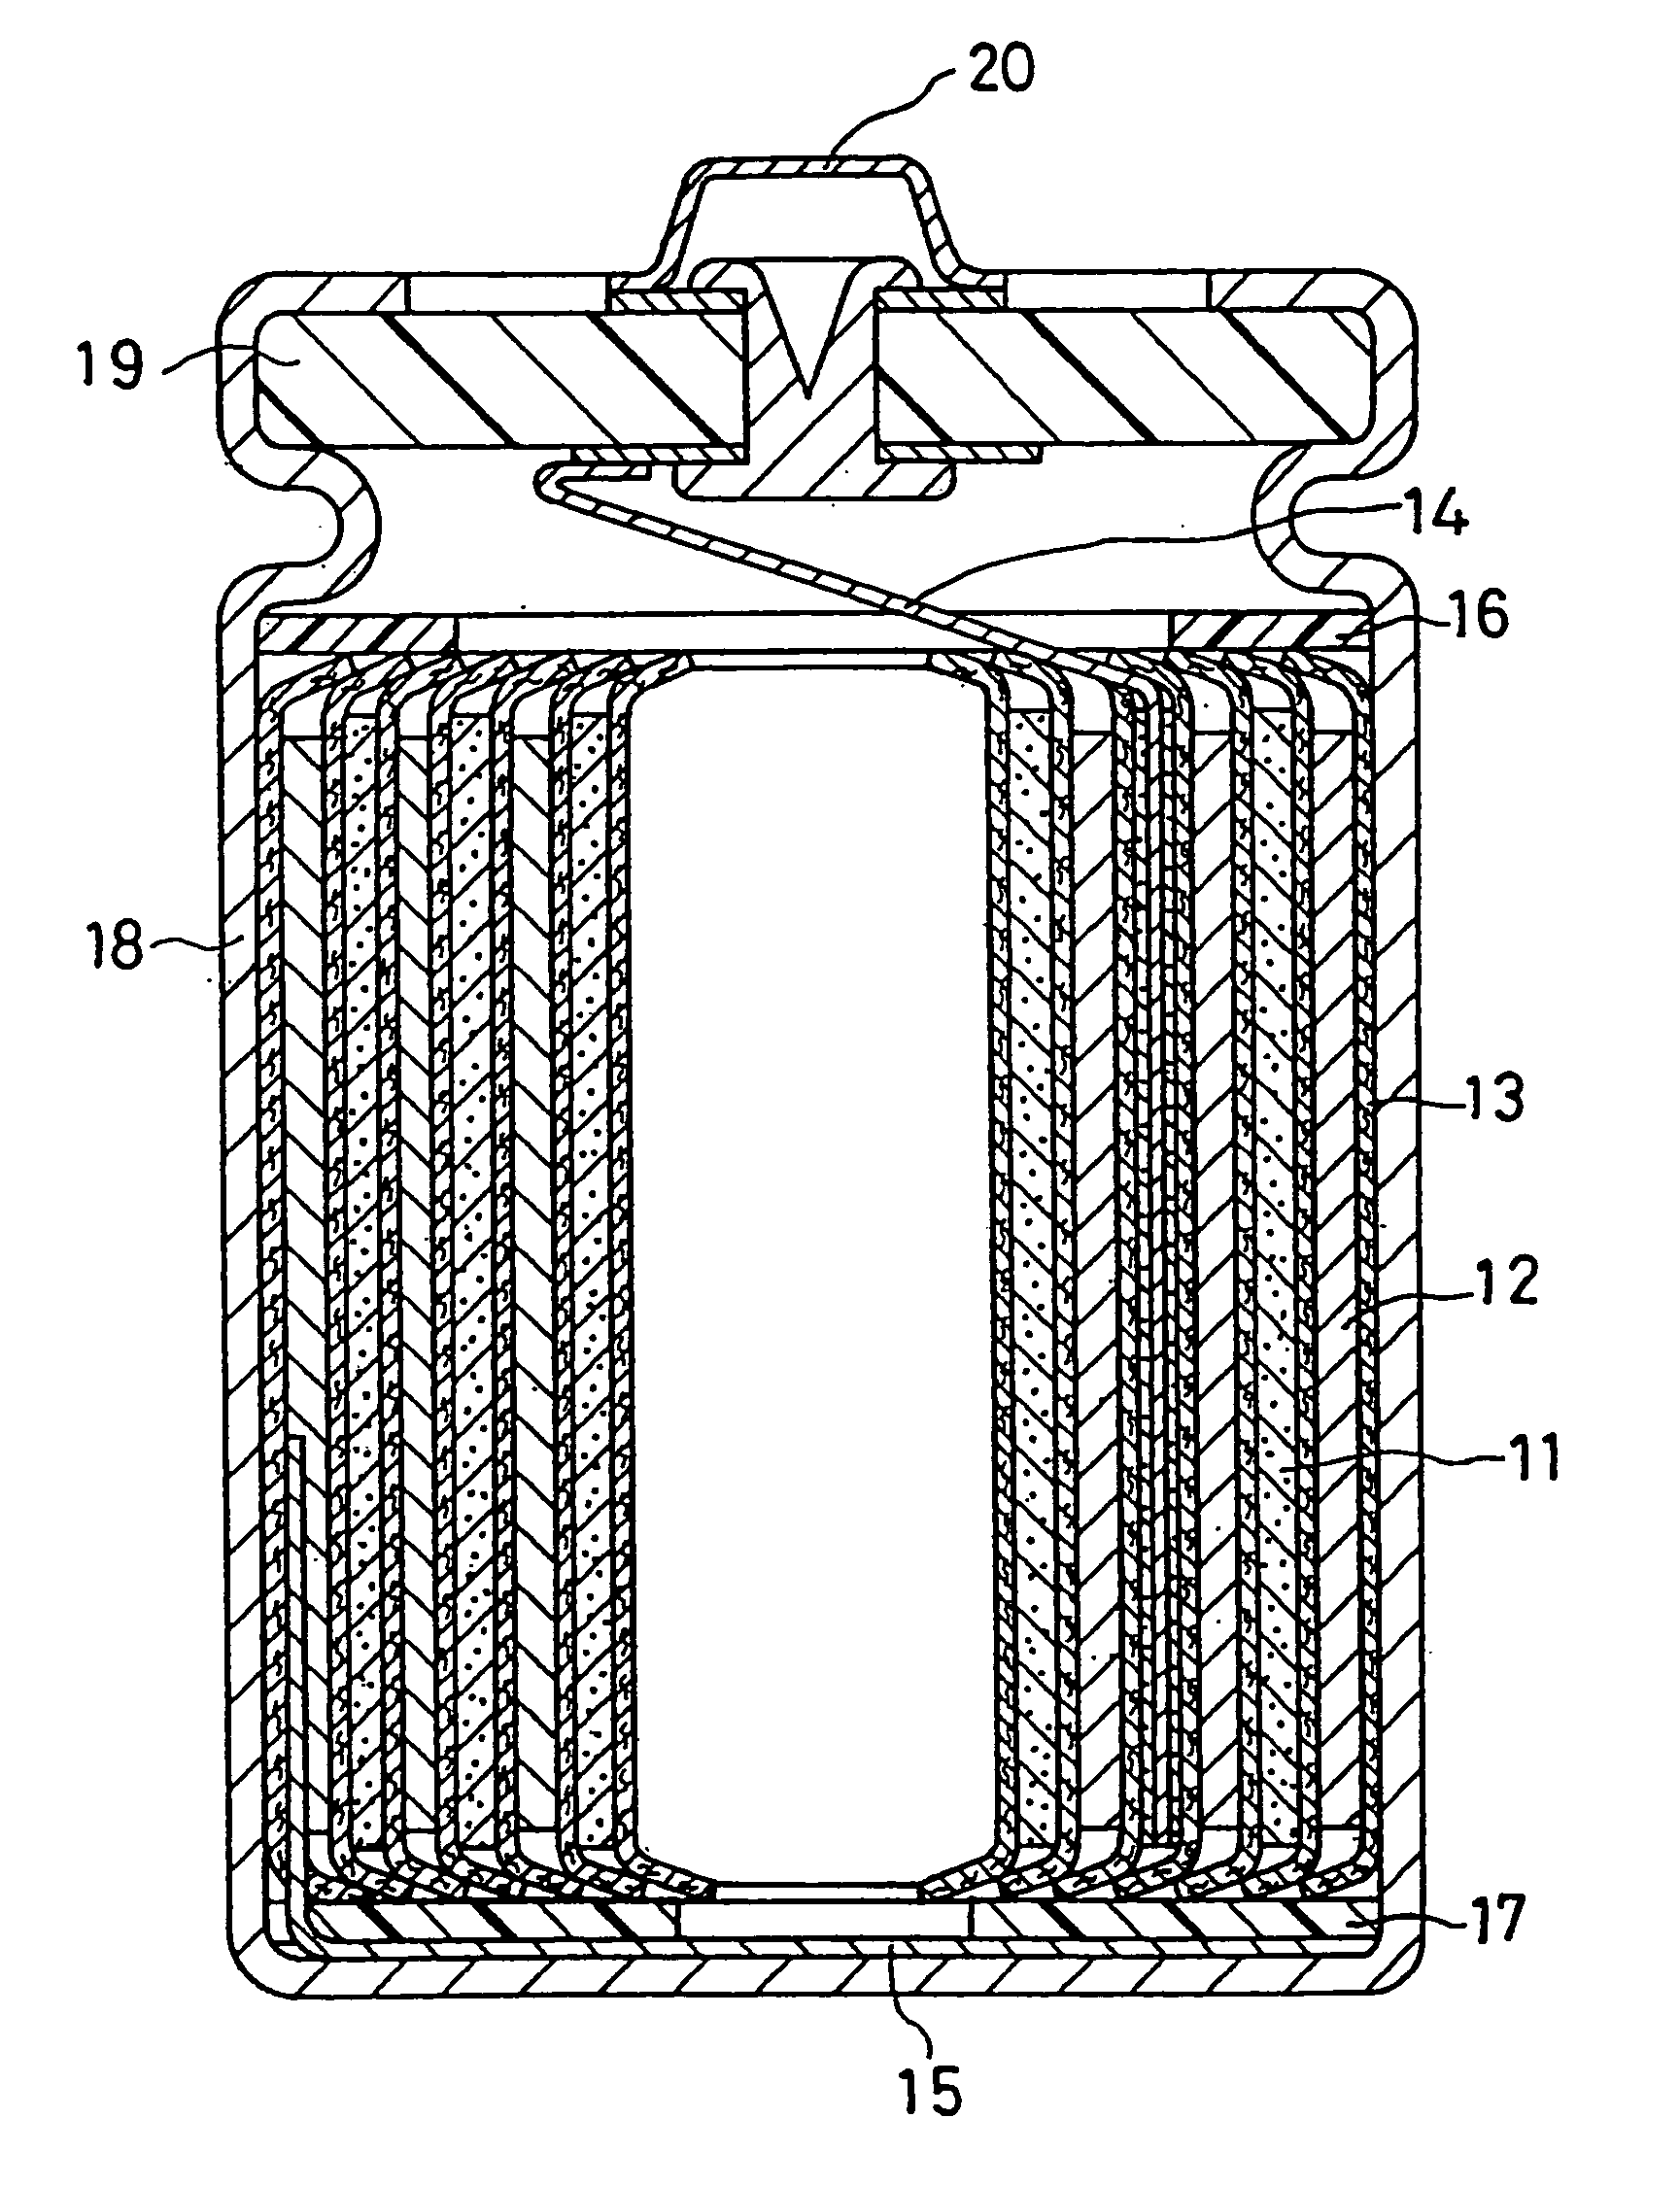 Lithium ion secondary battery and charging method therefor, and charge or charge/discharge control system for lithium ion secondary battery